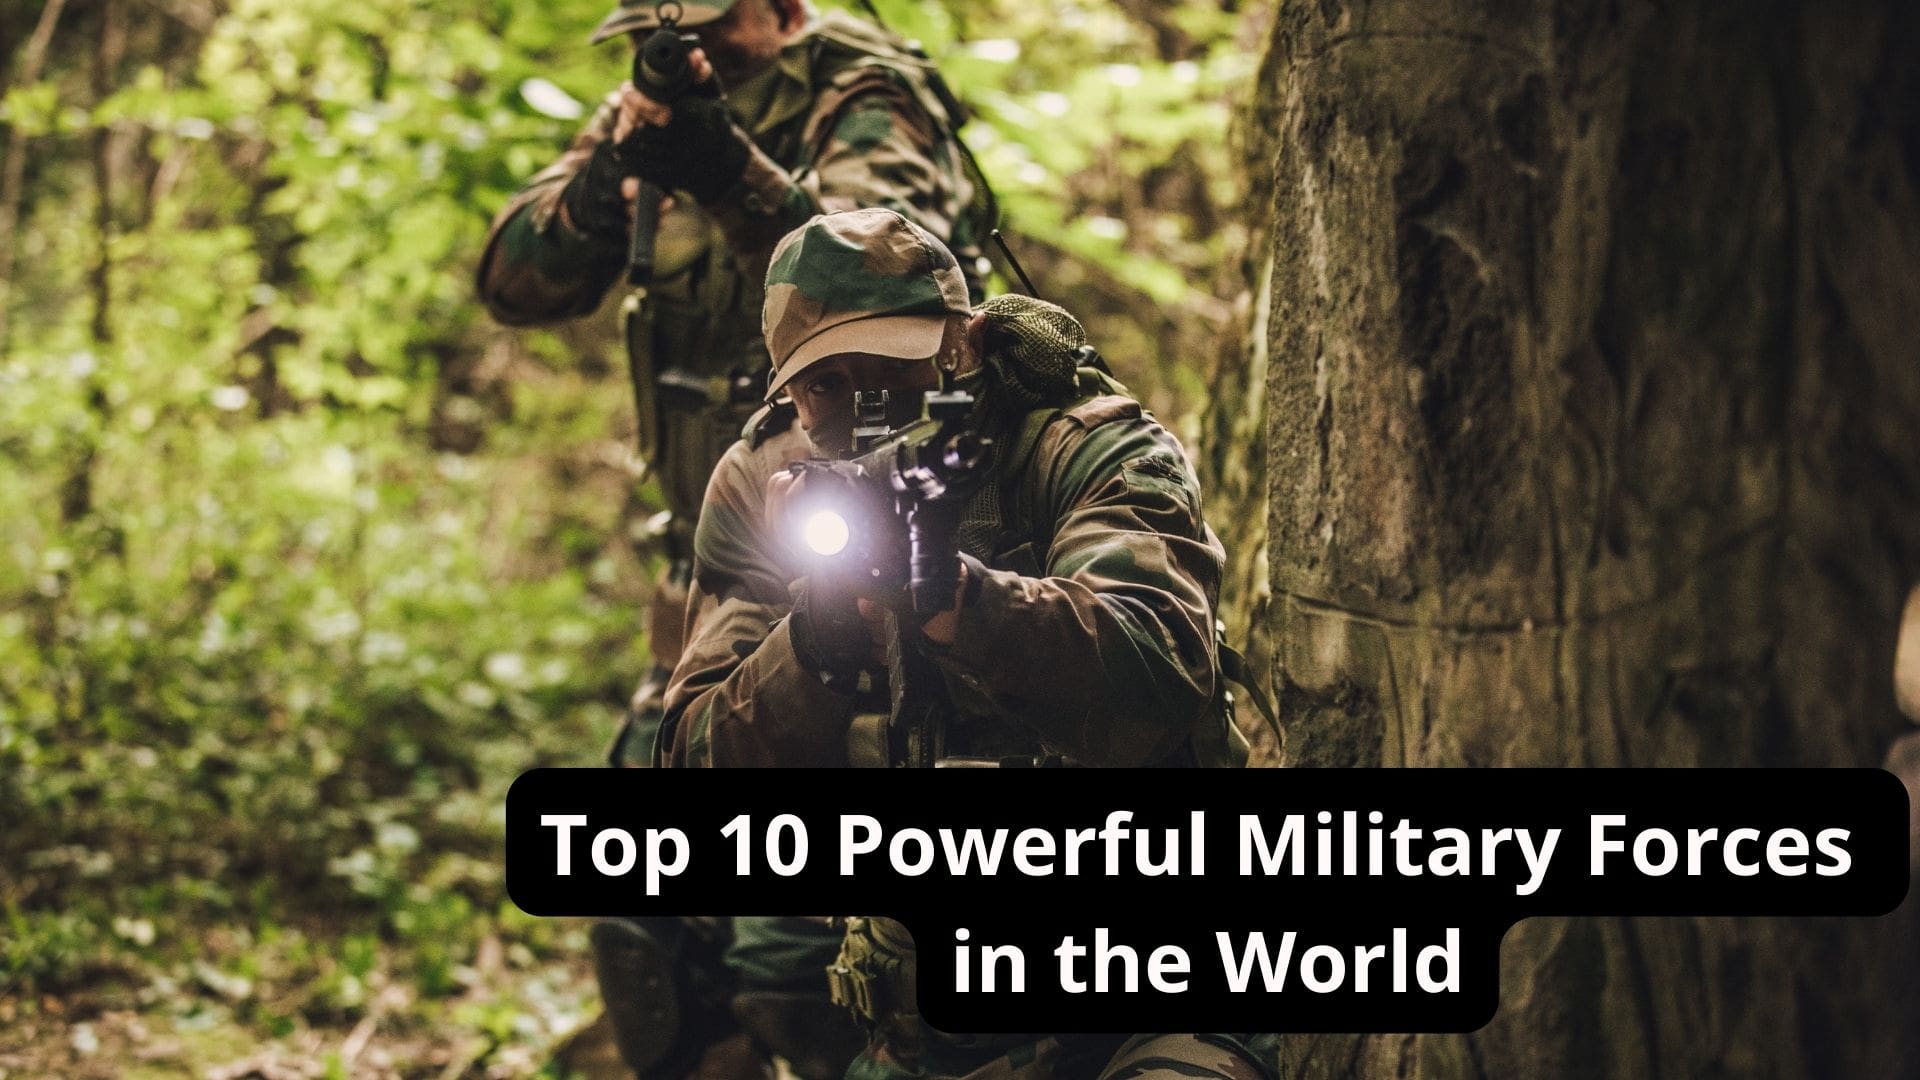 Top 10 Most Powerful Military Forces in the World